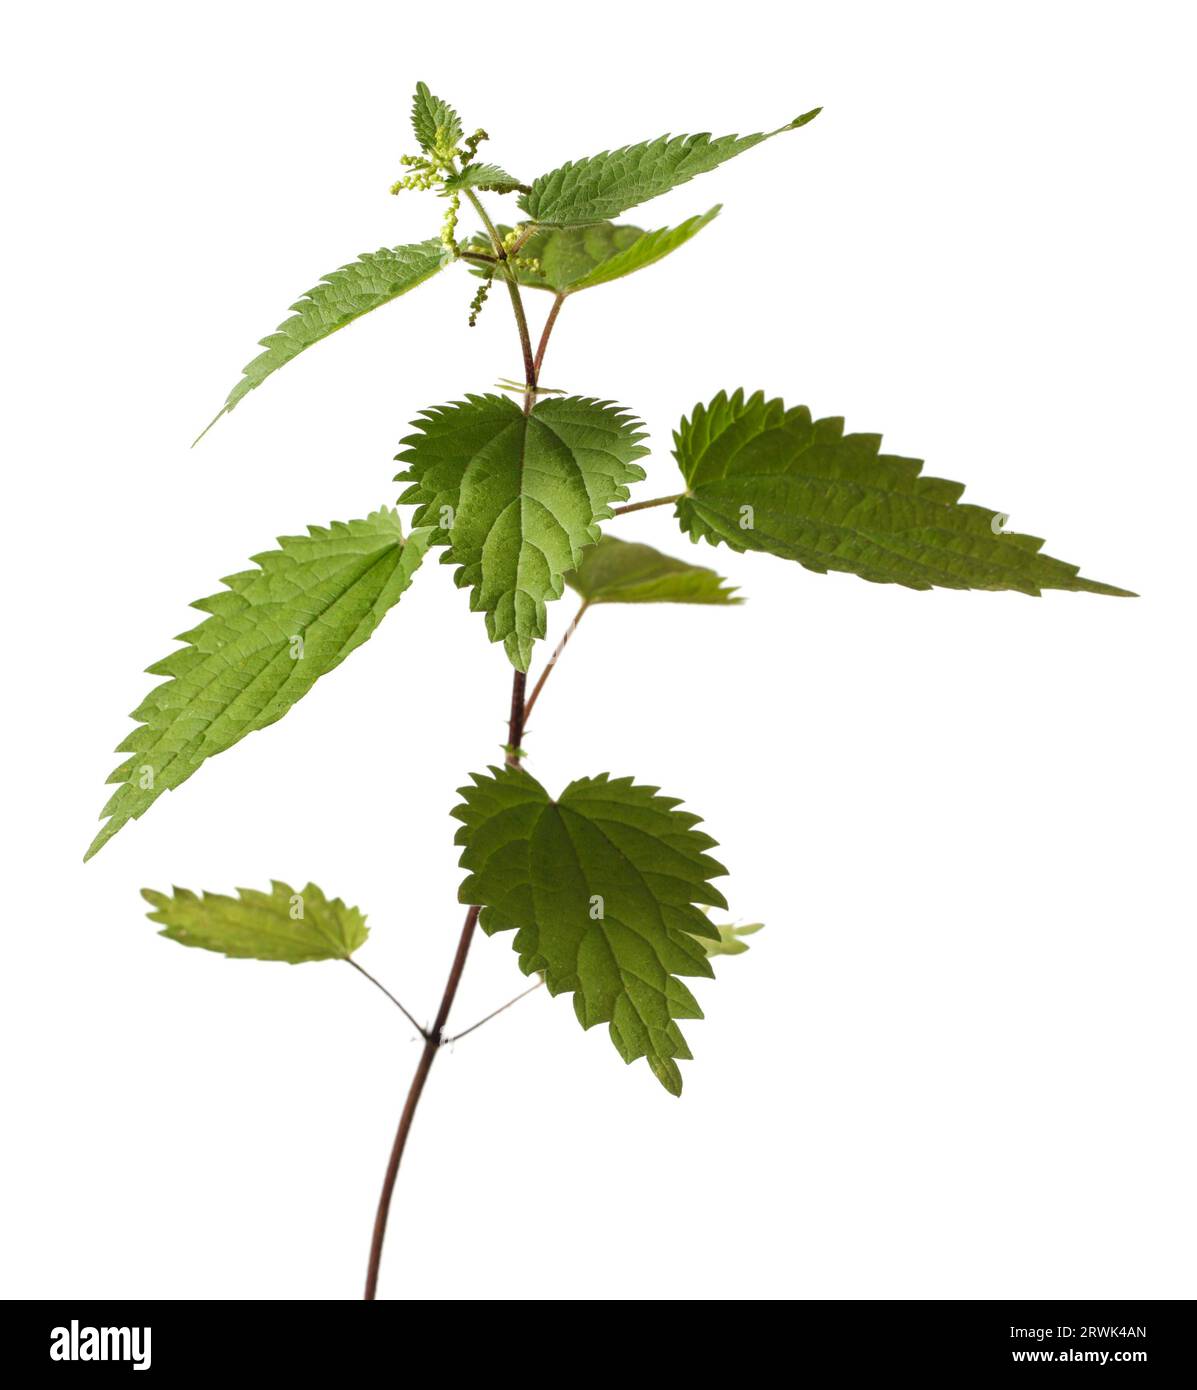 Stinging nettle (Urtica dioica) or common nettle, is a herbaceous perennial flowering plant Stock Photo